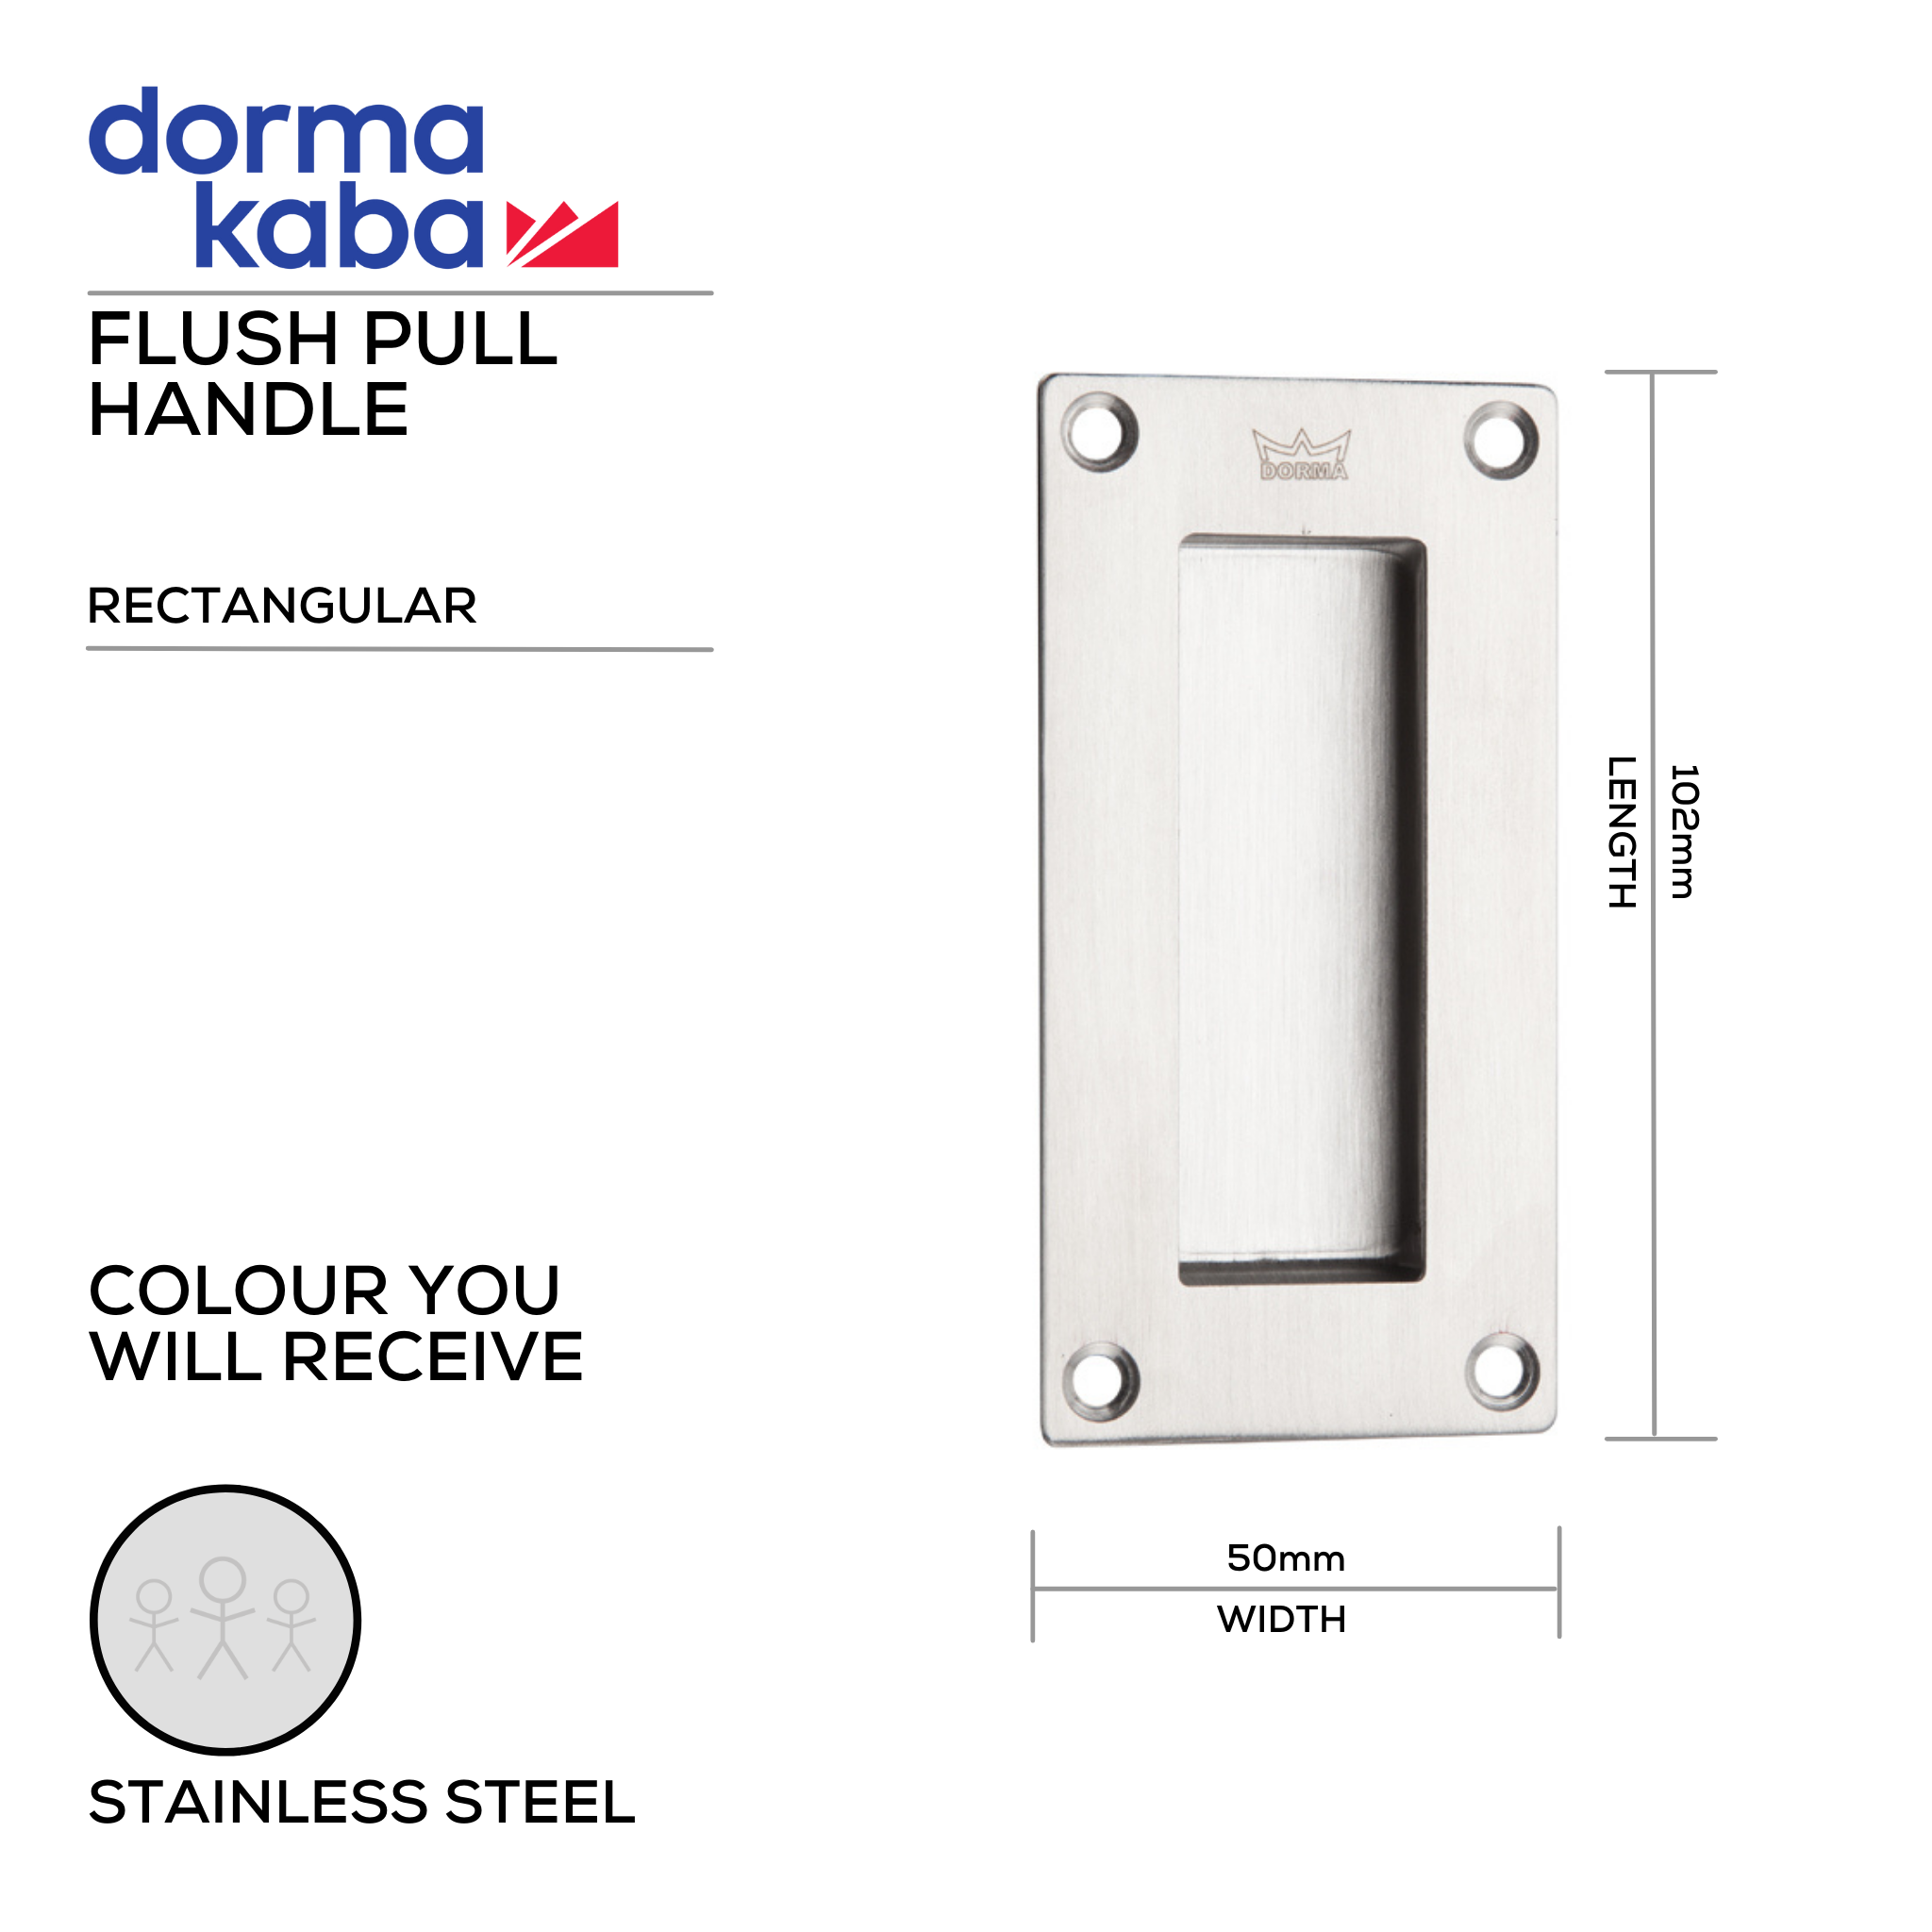 DFP-SS-026, Pull Handle, Recessed, Flush, Rectangular, 102mm (l) x 50mm (w), Stainless Steel, DORMAKABA